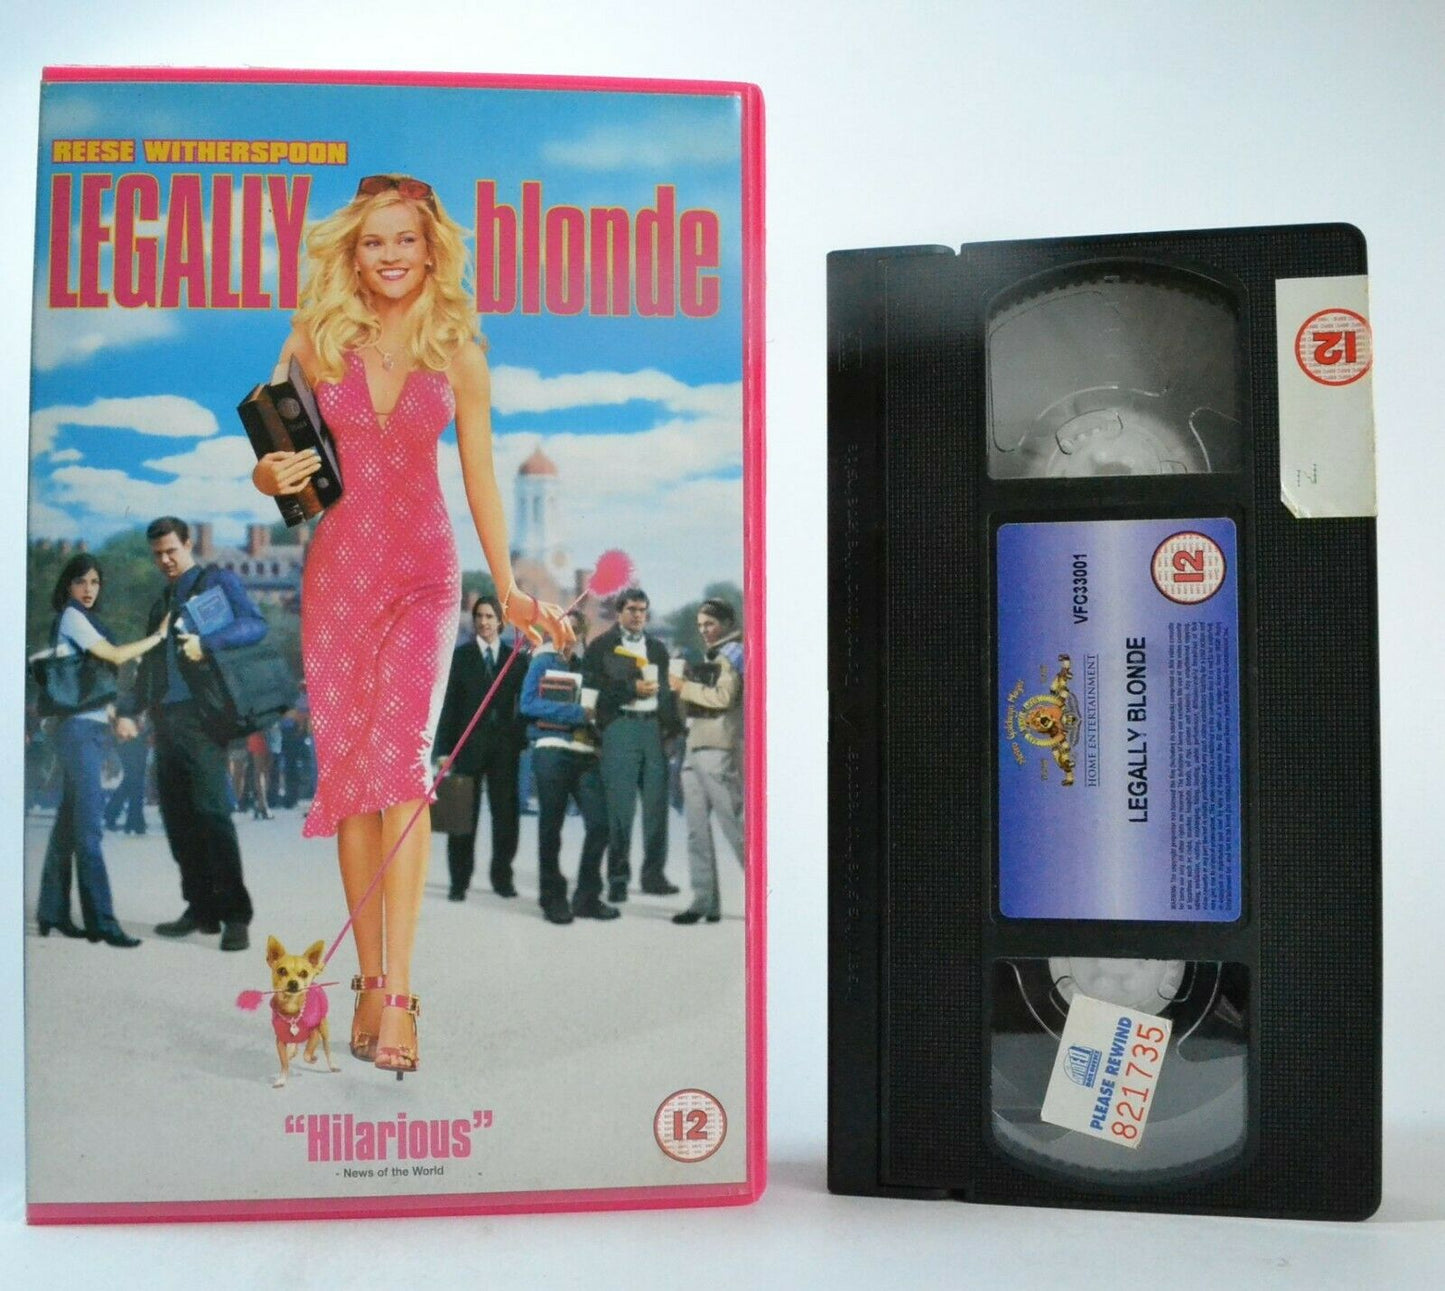 Legally Blonde: Metro Goldwyn (2001) - Comedy - Large Box - R.Witherspoon - VHS-